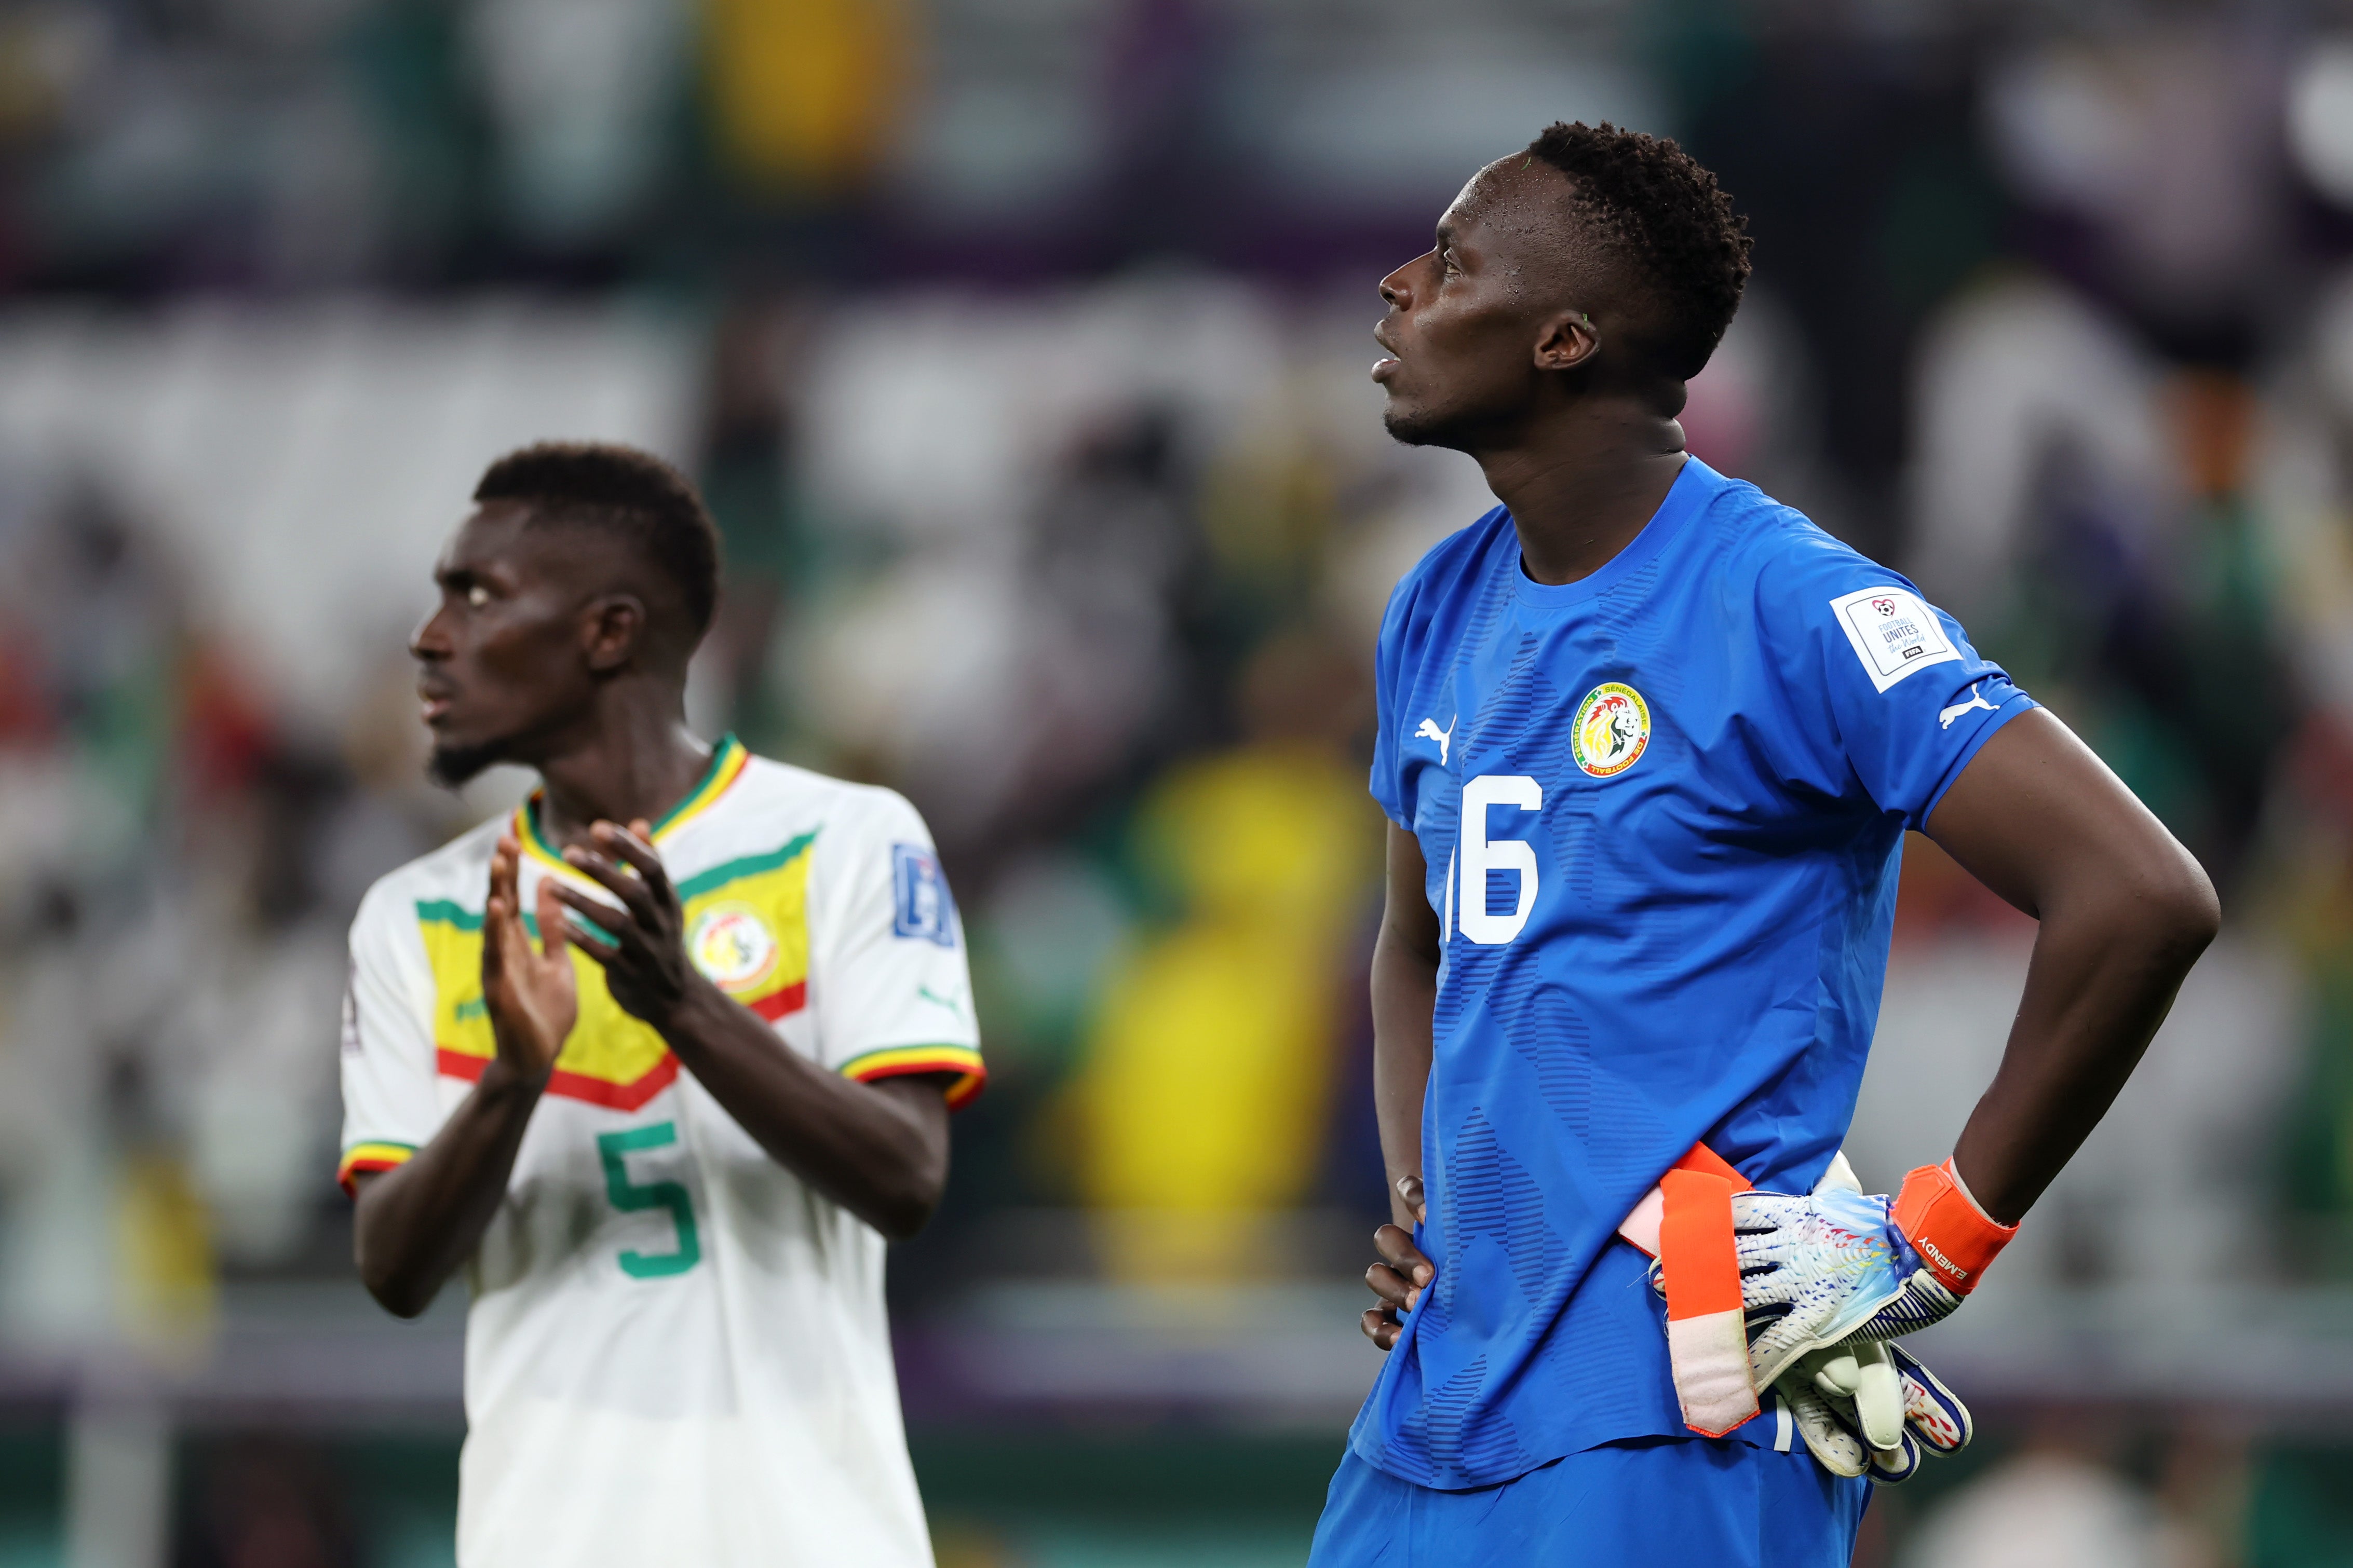 Senegal slipped to defeat in their opener and now face a must-win game against hosts Qatar